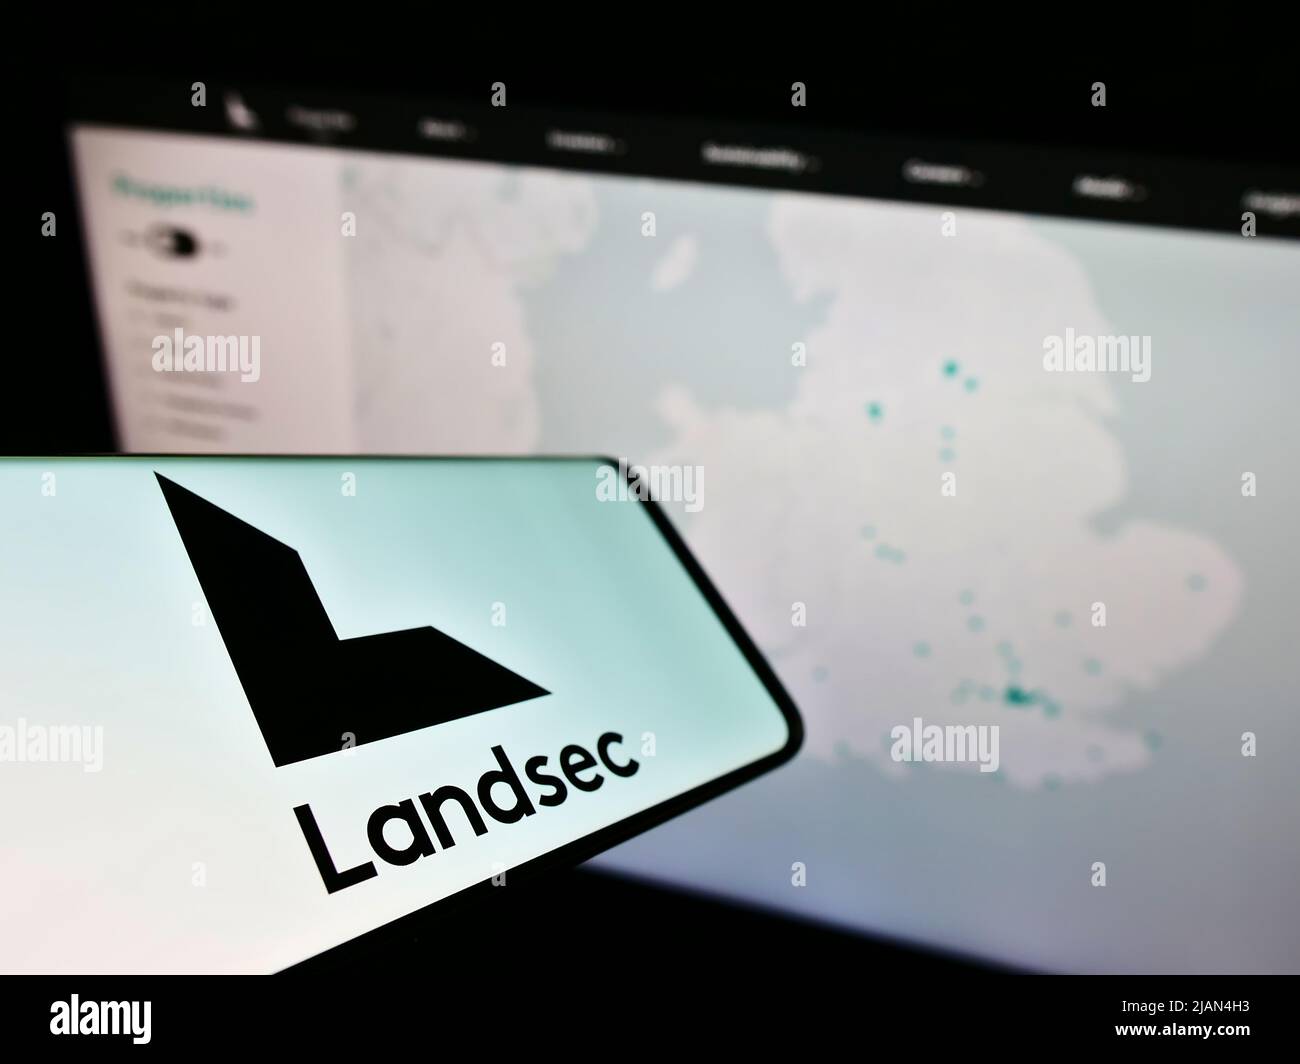 Mobile phone with logo of company Land Securities Group plc (Landsec) on screen in front of business website. Focus on center of phone display. Stock Photo